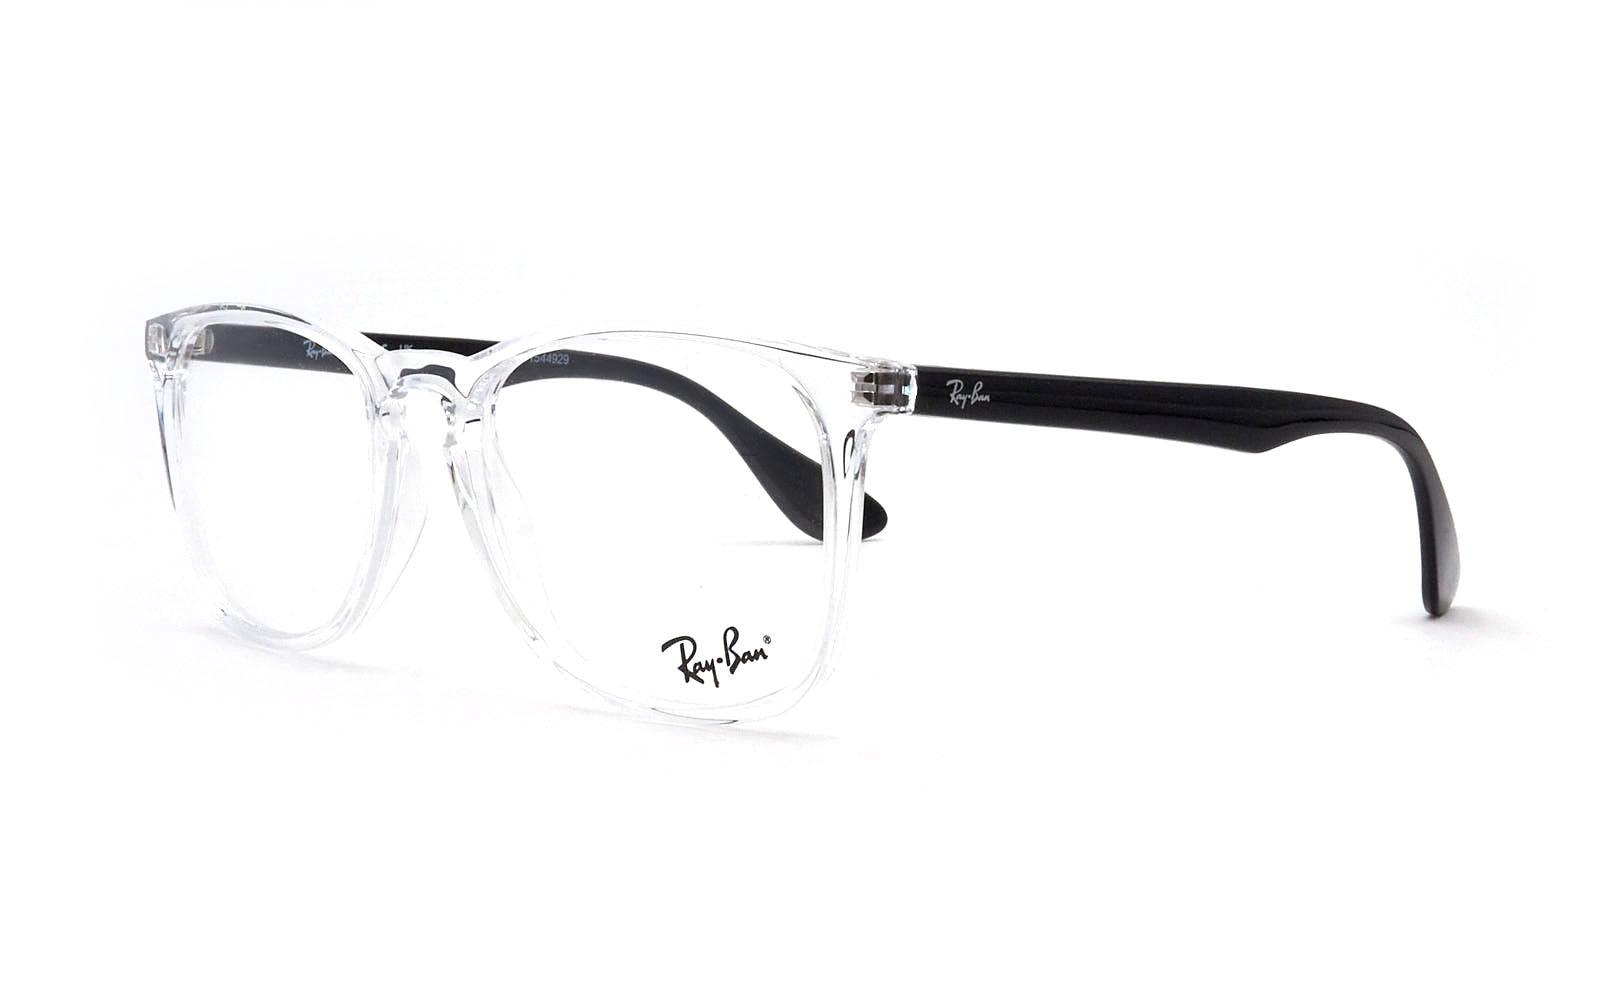 ray-ban 7074 5943 - Opticas Lookout